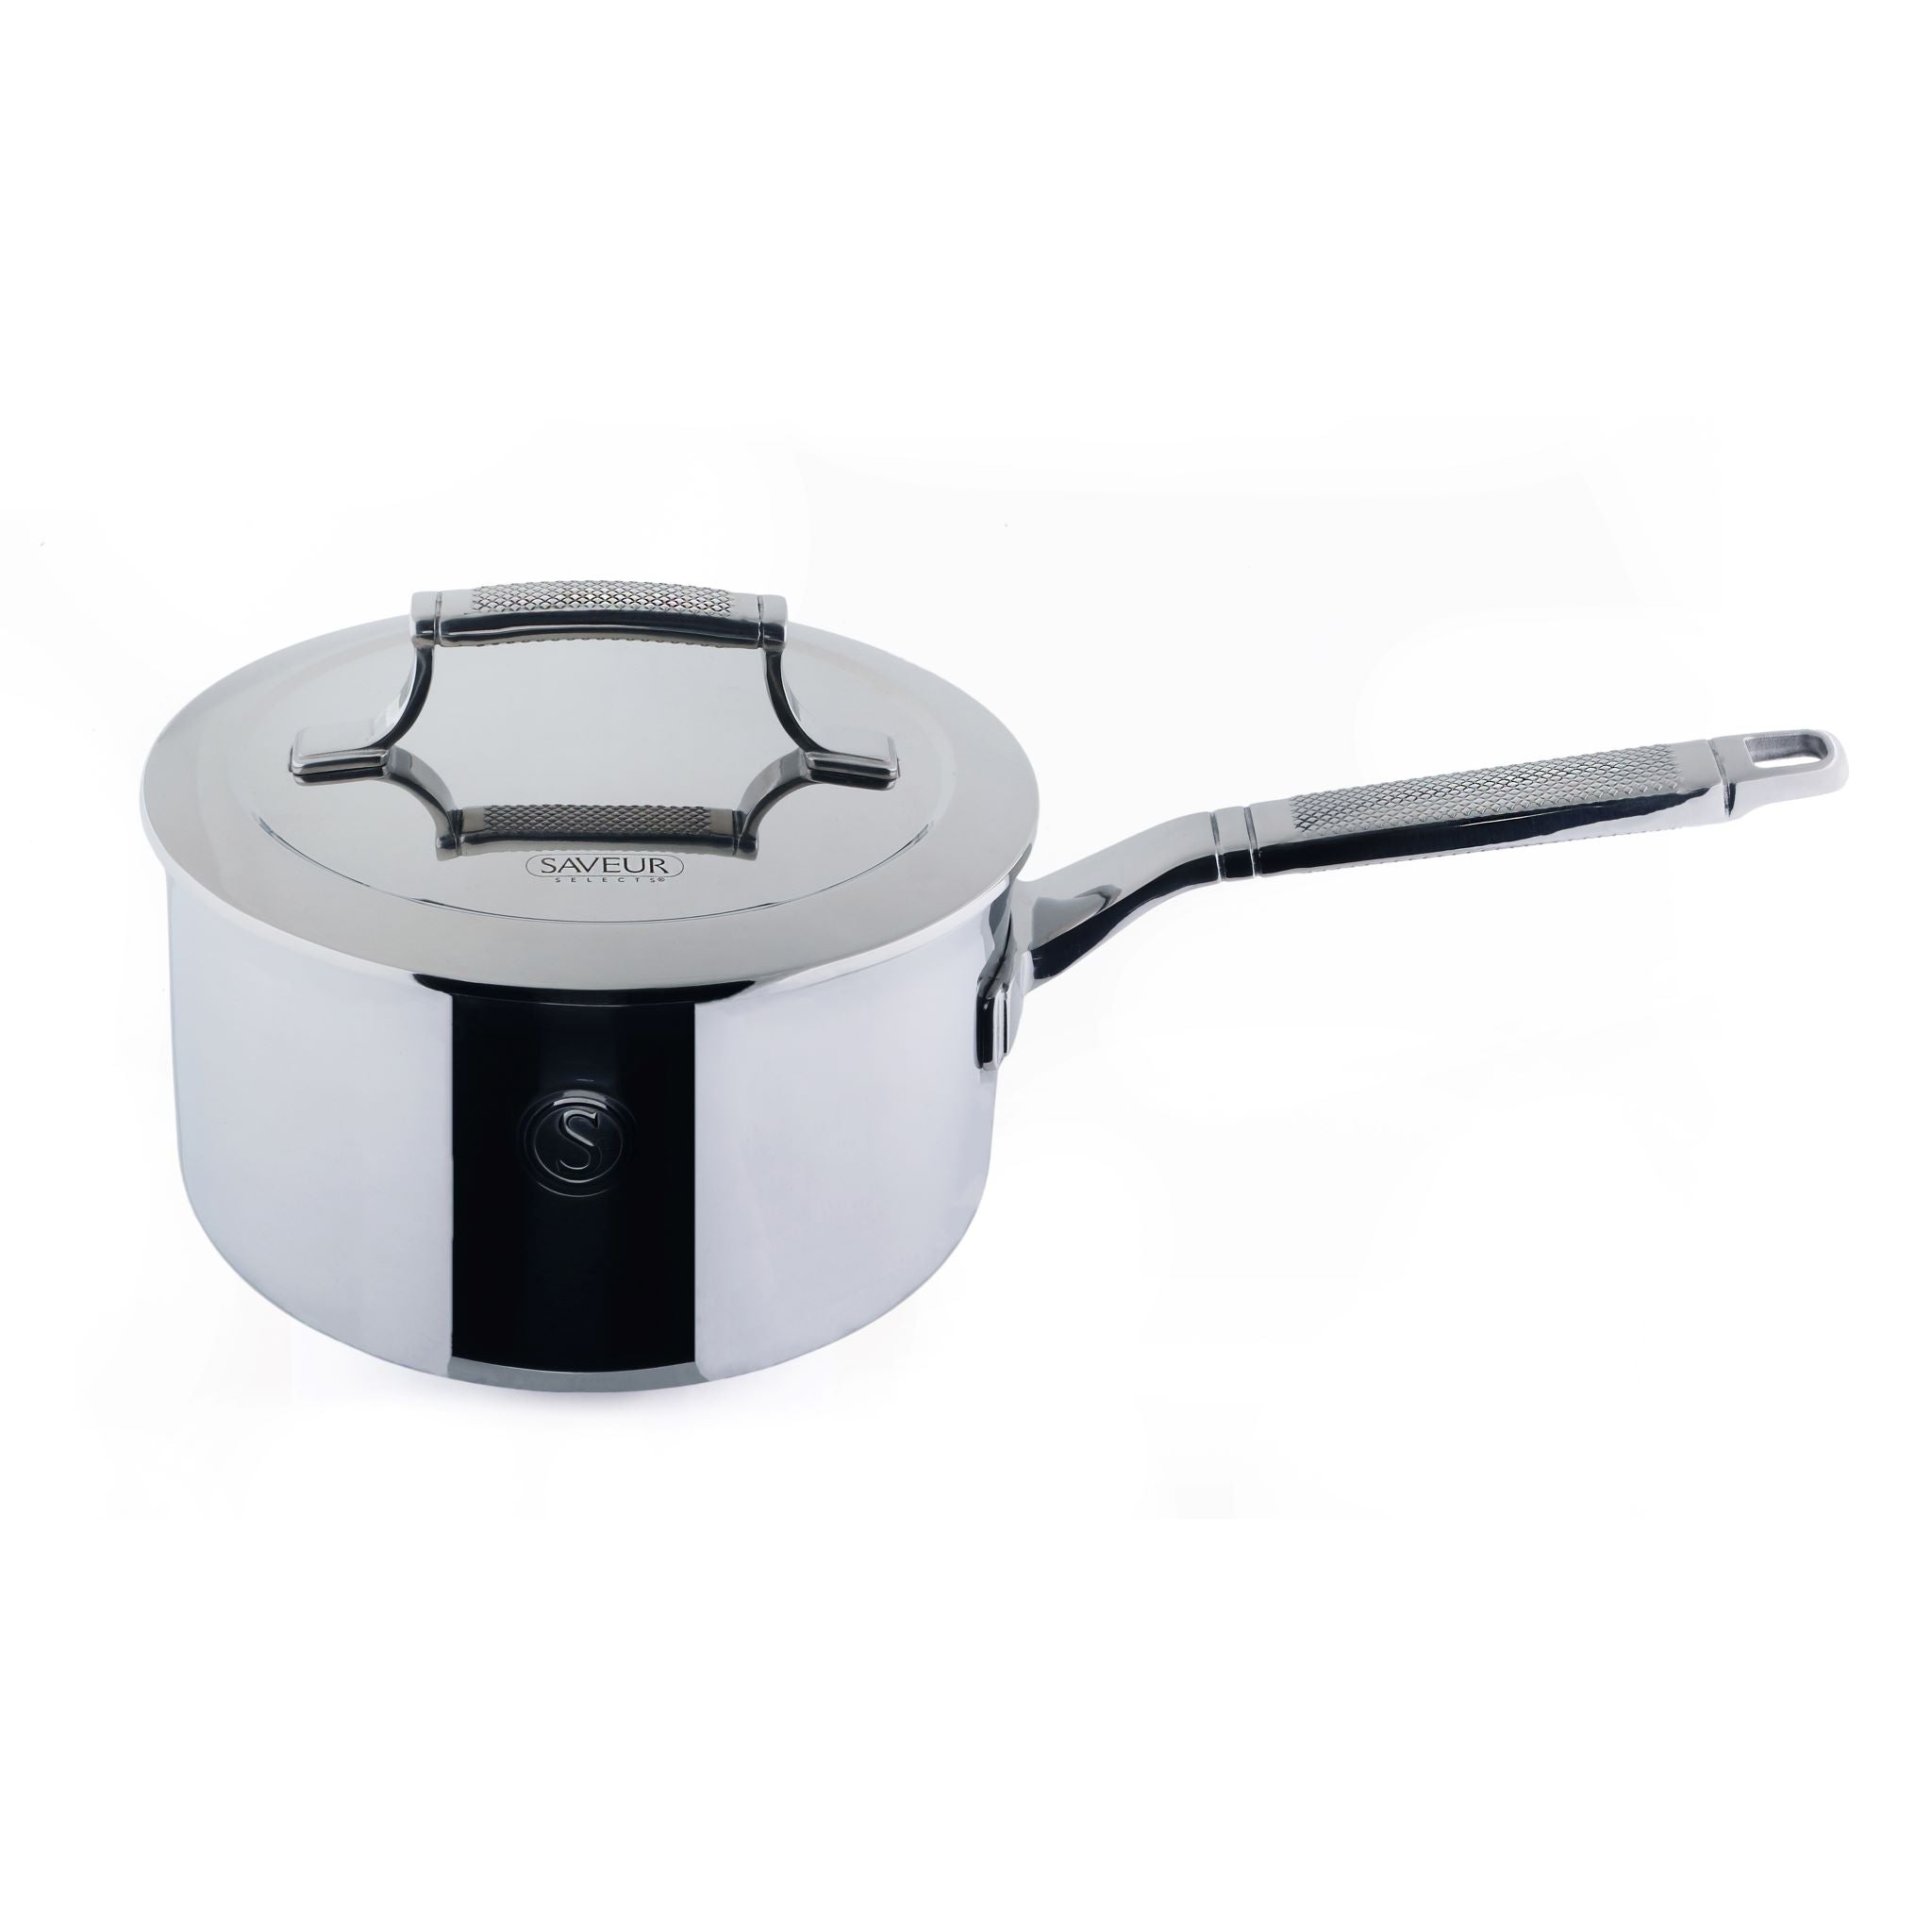 Stainless Steel Tri-Ply Saucepan 2.8L with Double Walled Insulating Lid - 20cm